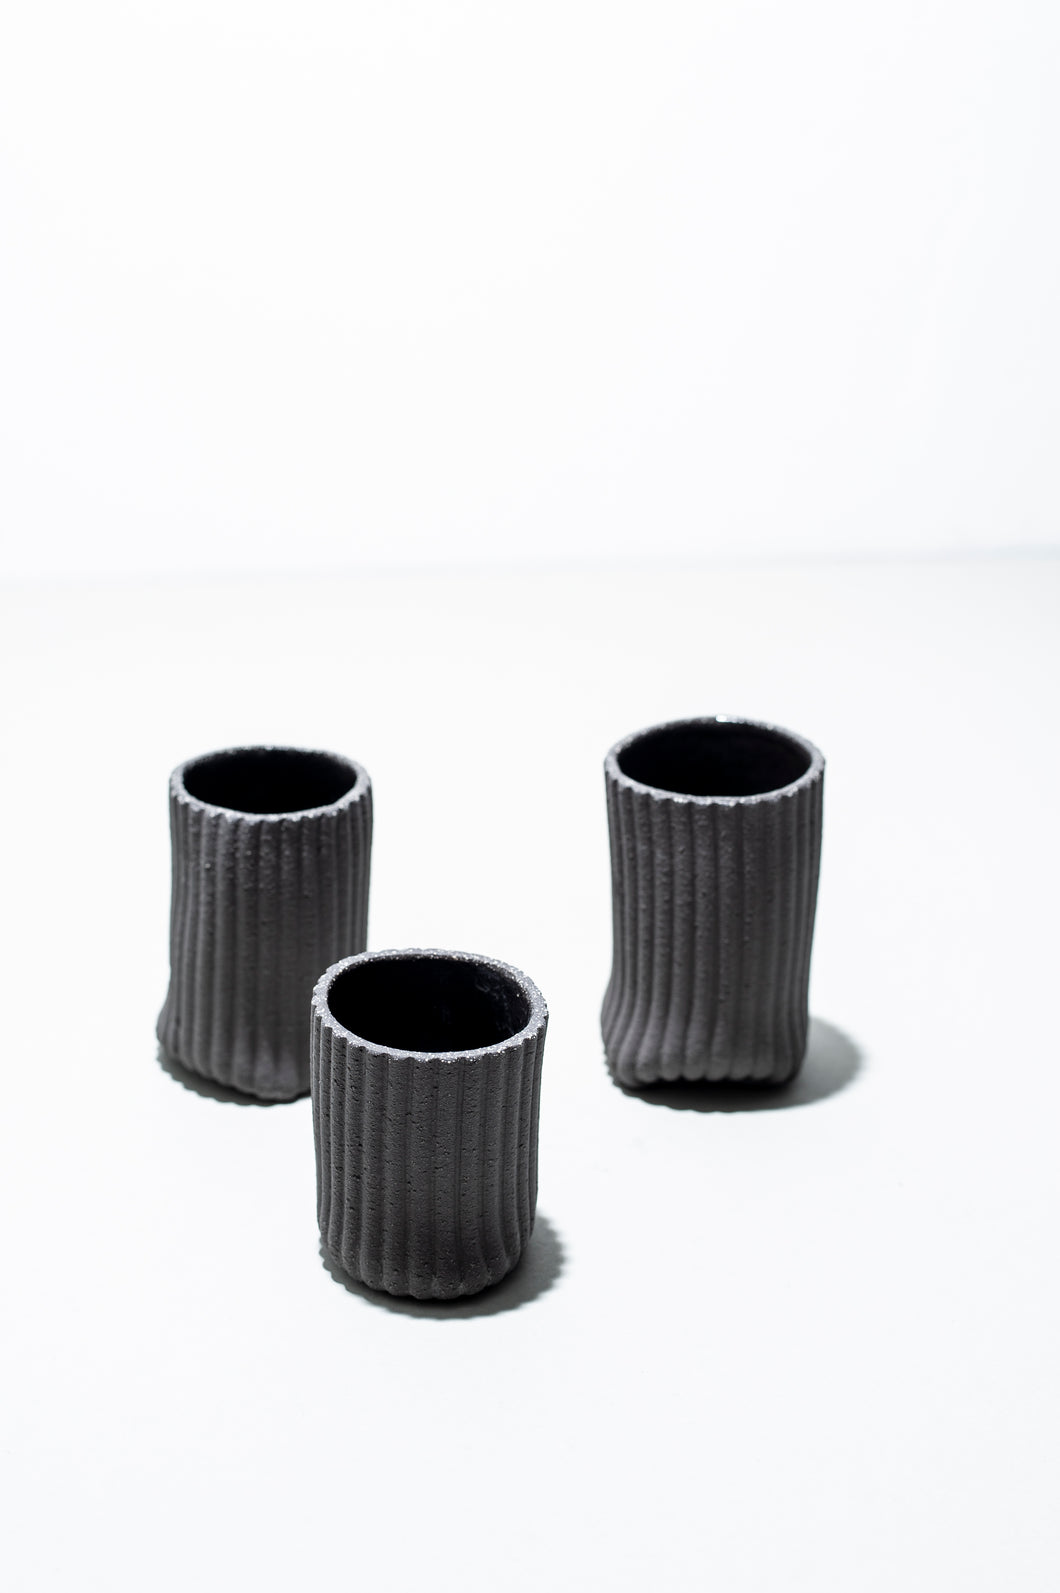 ANTHRACITE CUPS SMALL/ MANUEL KUGLER